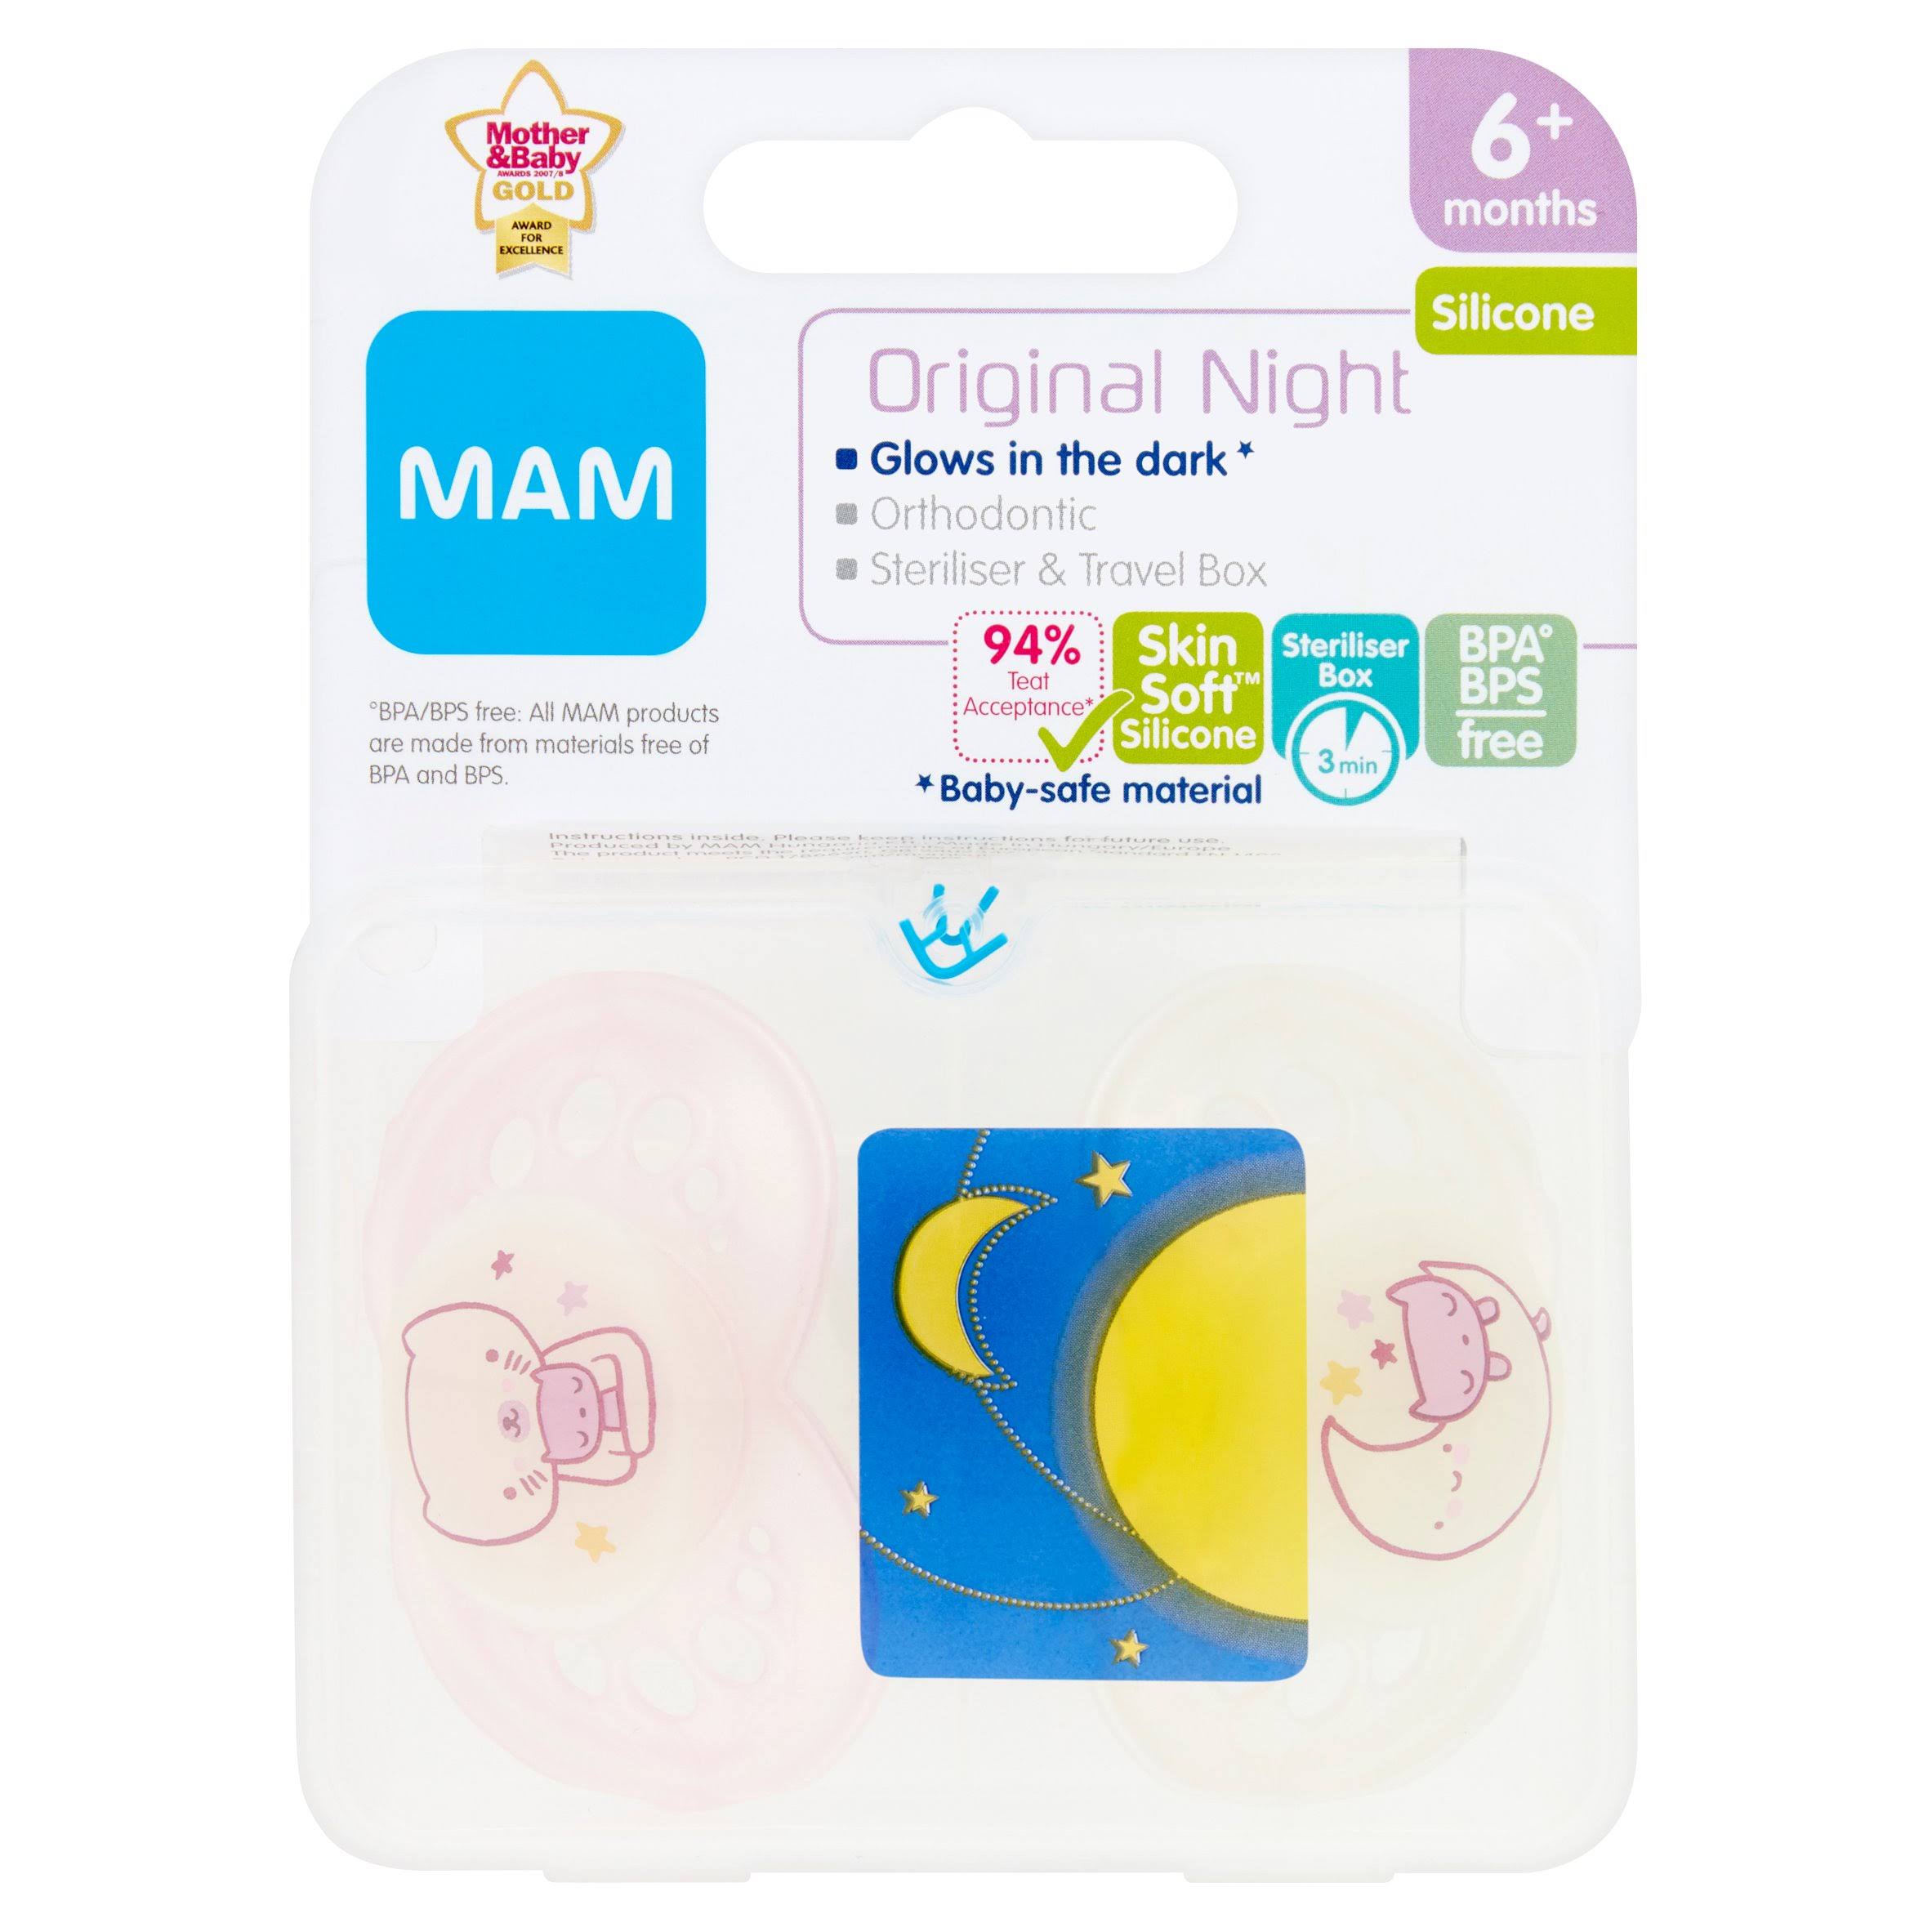 Mam 2 Original Night Silicone Soothers - 6 Plus Months